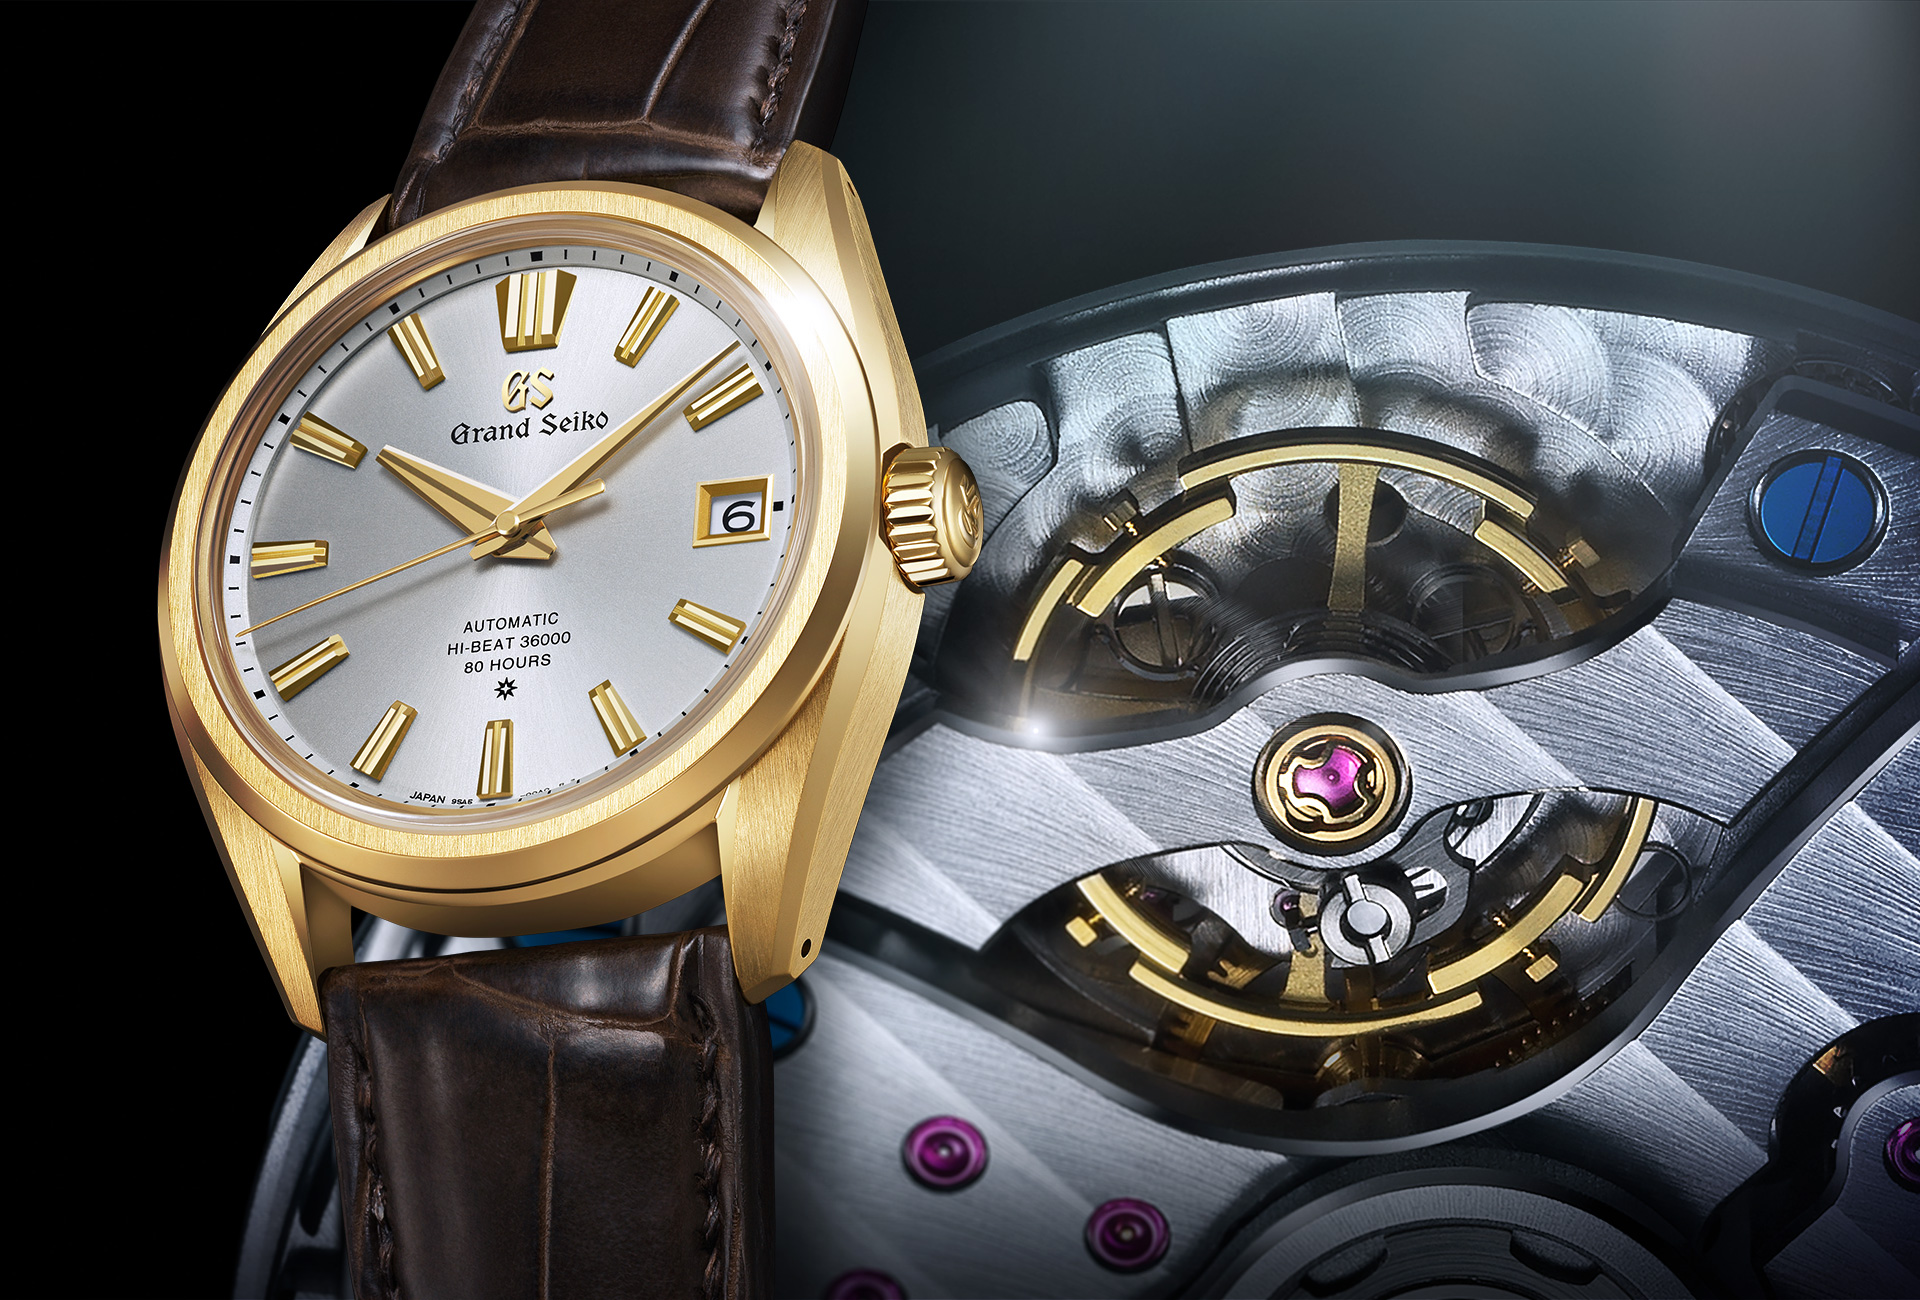 The powerful roar of the Grand Seiko lion at 60